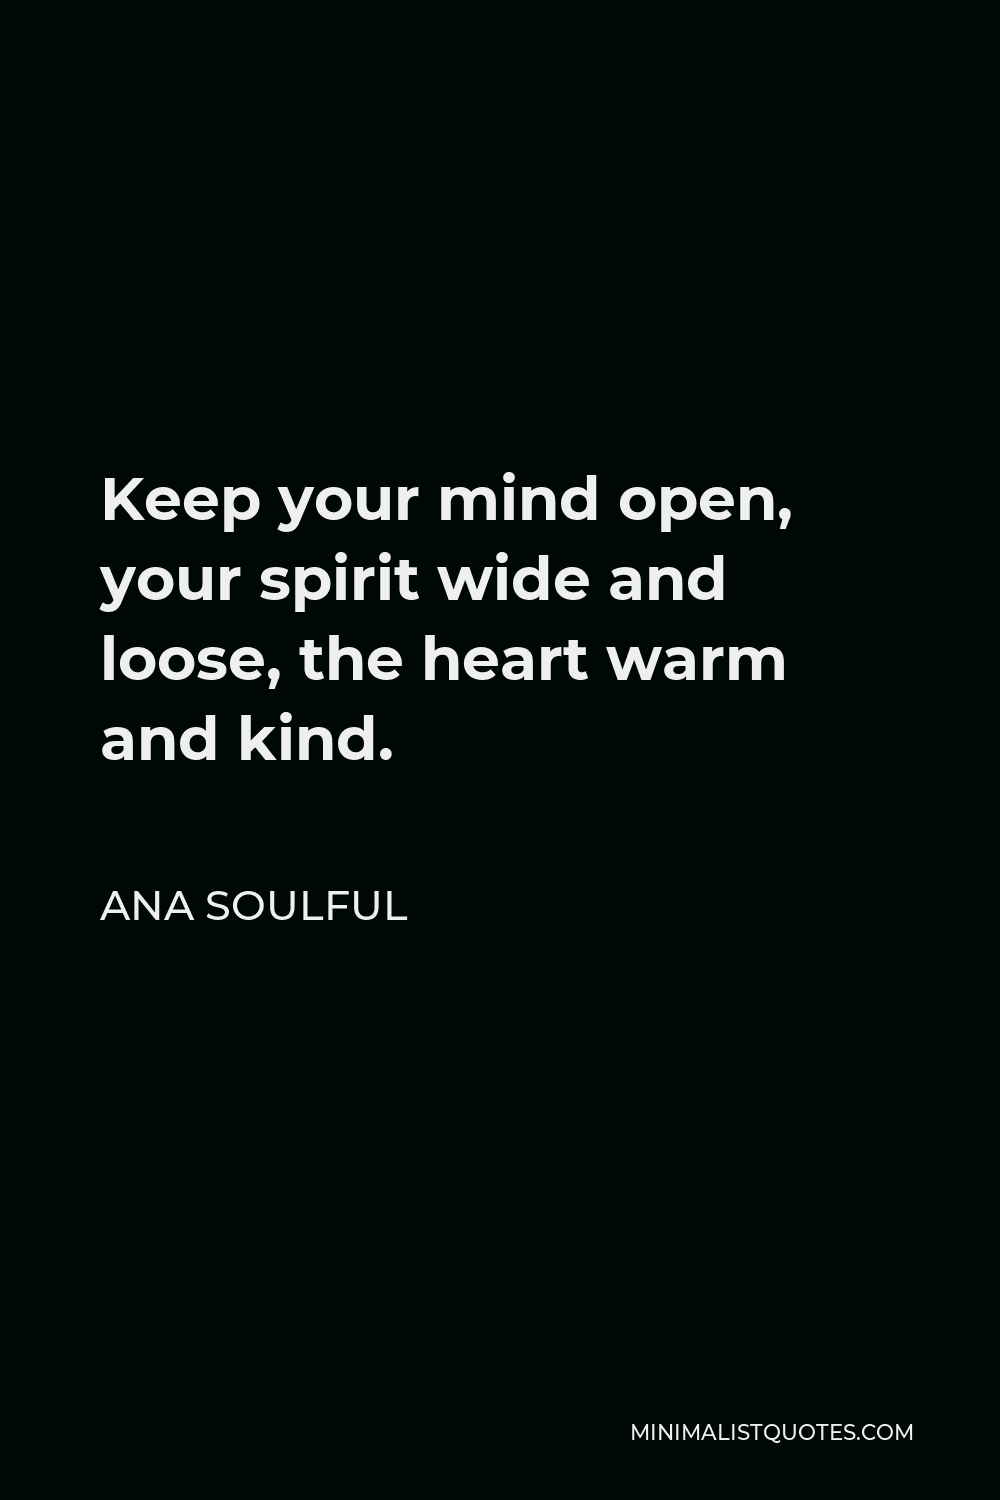 Ana Soulful Quote - Keep your mind open, your spirit wide and loose, the heart warm and kind.